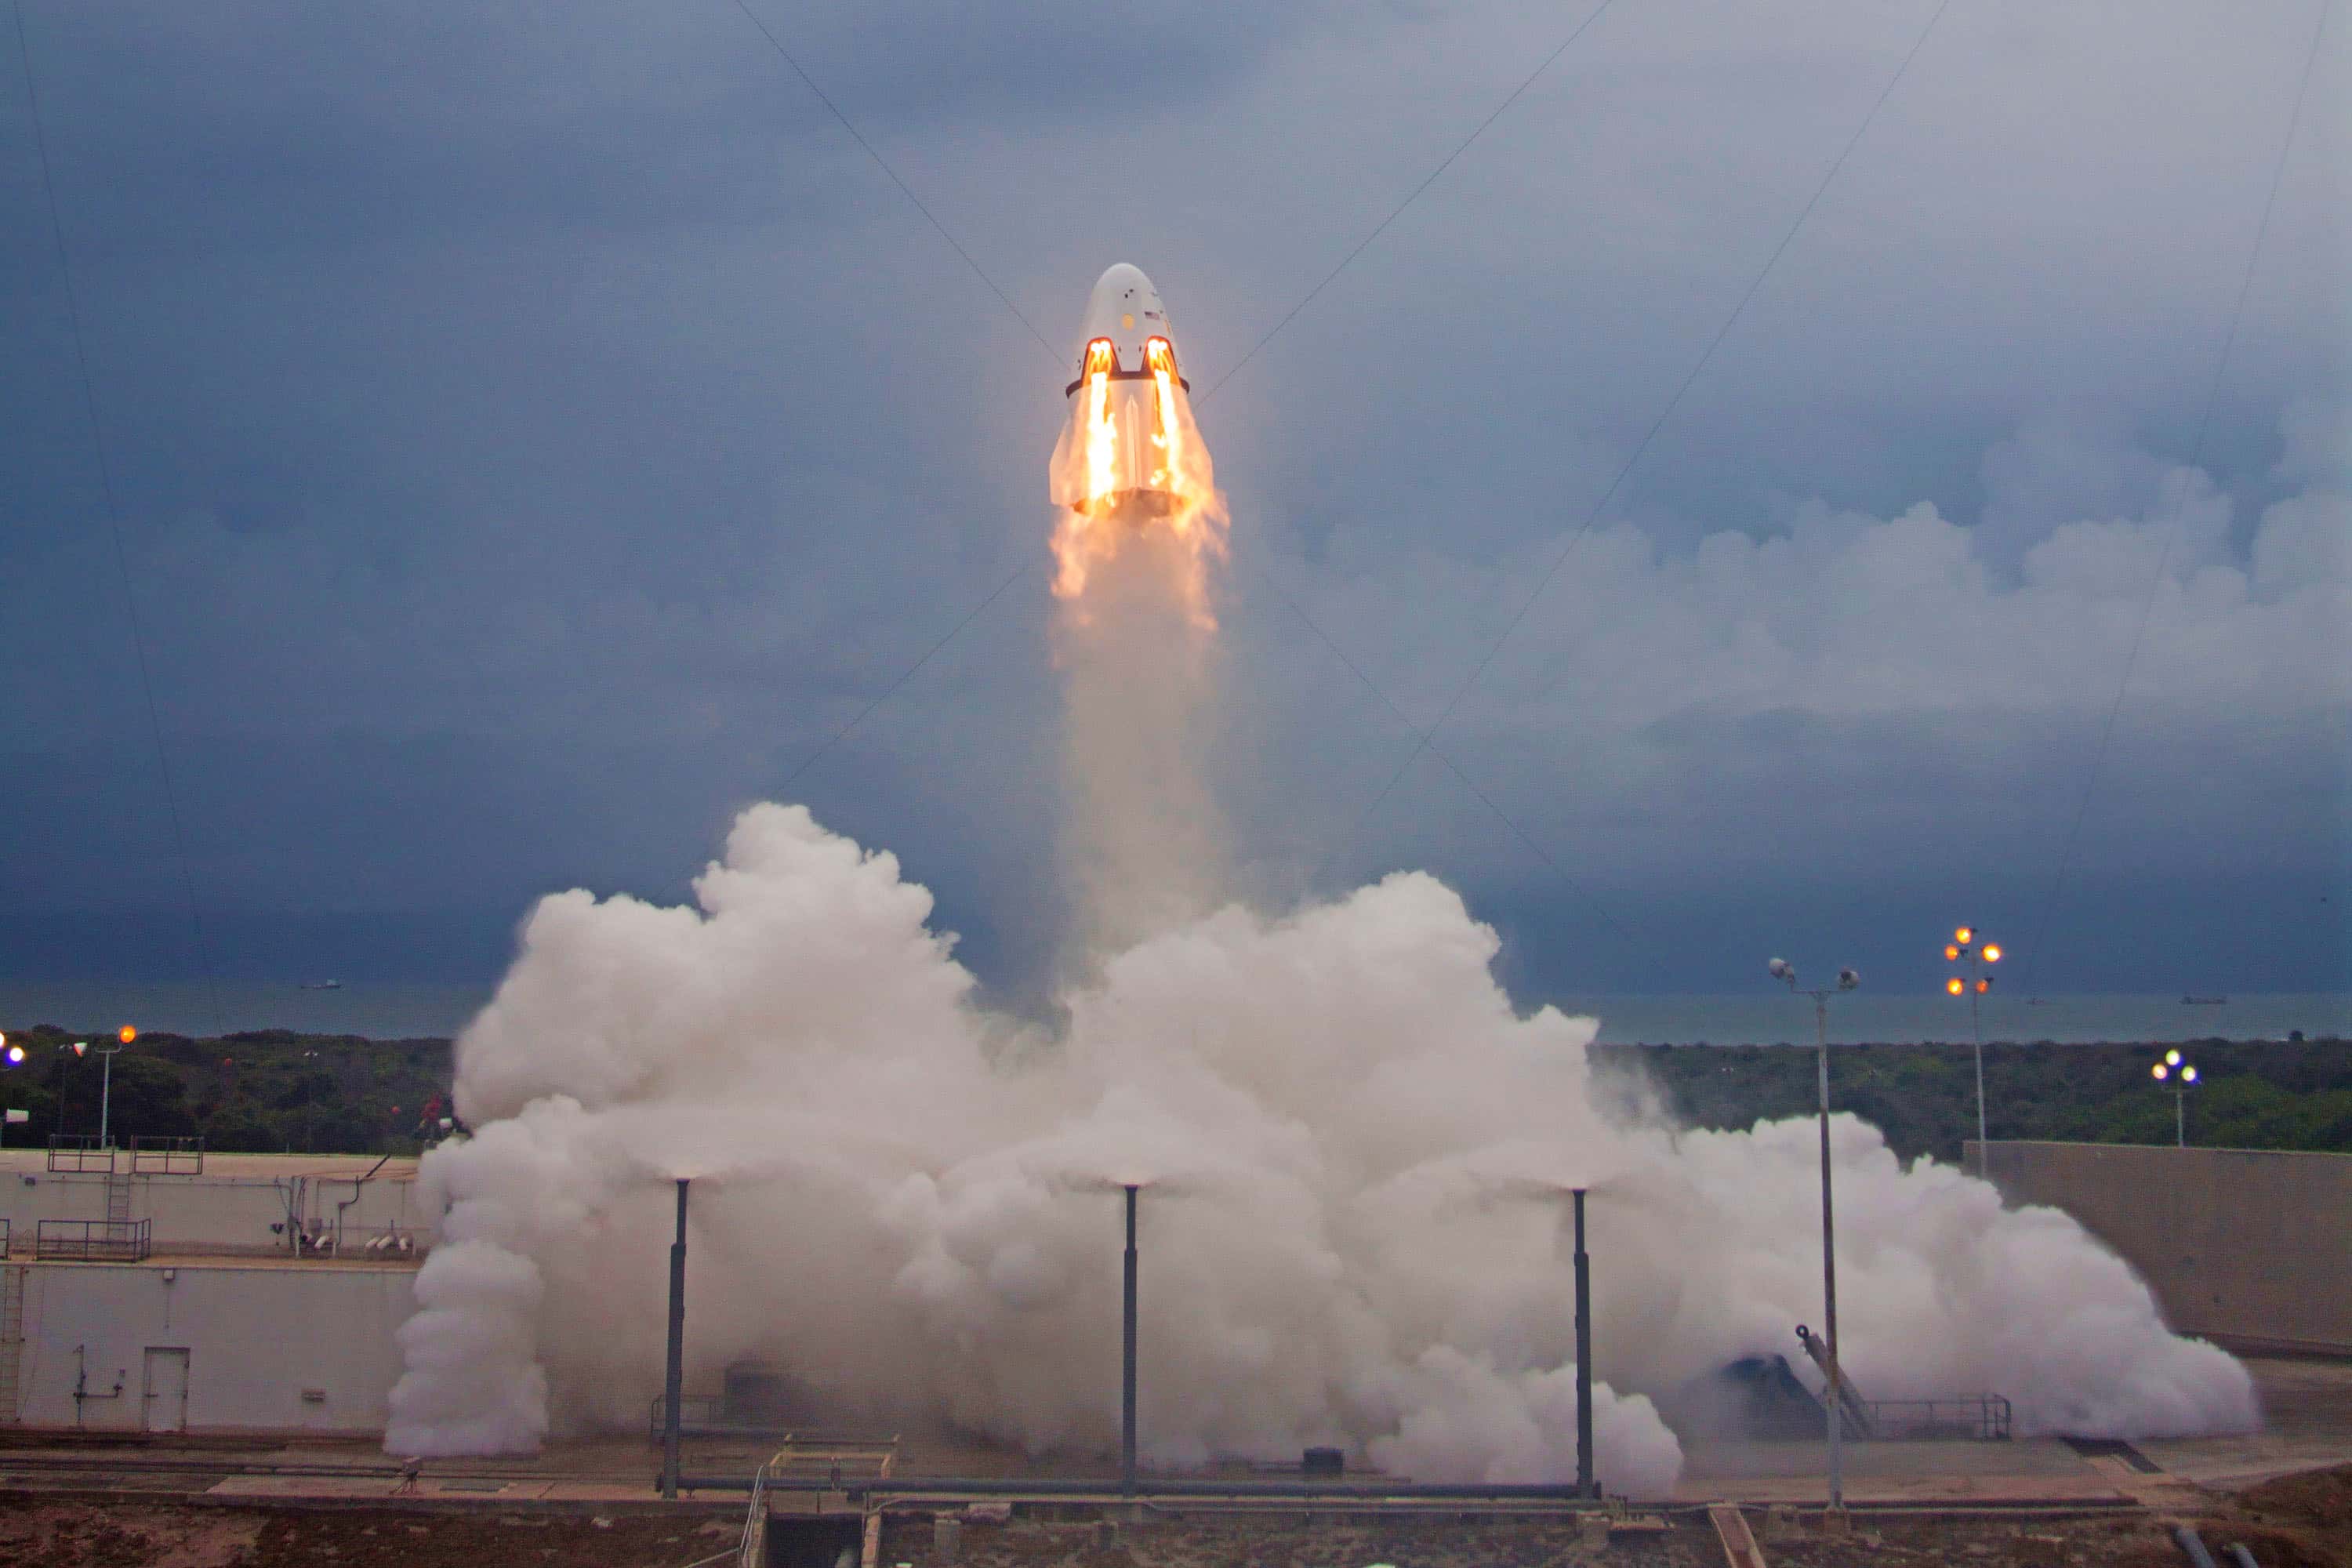 <p>SpaceX has a launch abort system in place in case anything goes wrong during lift-off. The failsafe method exerts no more Gs than a big amusement park ride as it ejects the spacecraft away from the launch vehicle. The Crew Dragon crew can escape the launch anywhere from the launch pad up to orbit because the system is built into the spacecraft itself.</p>